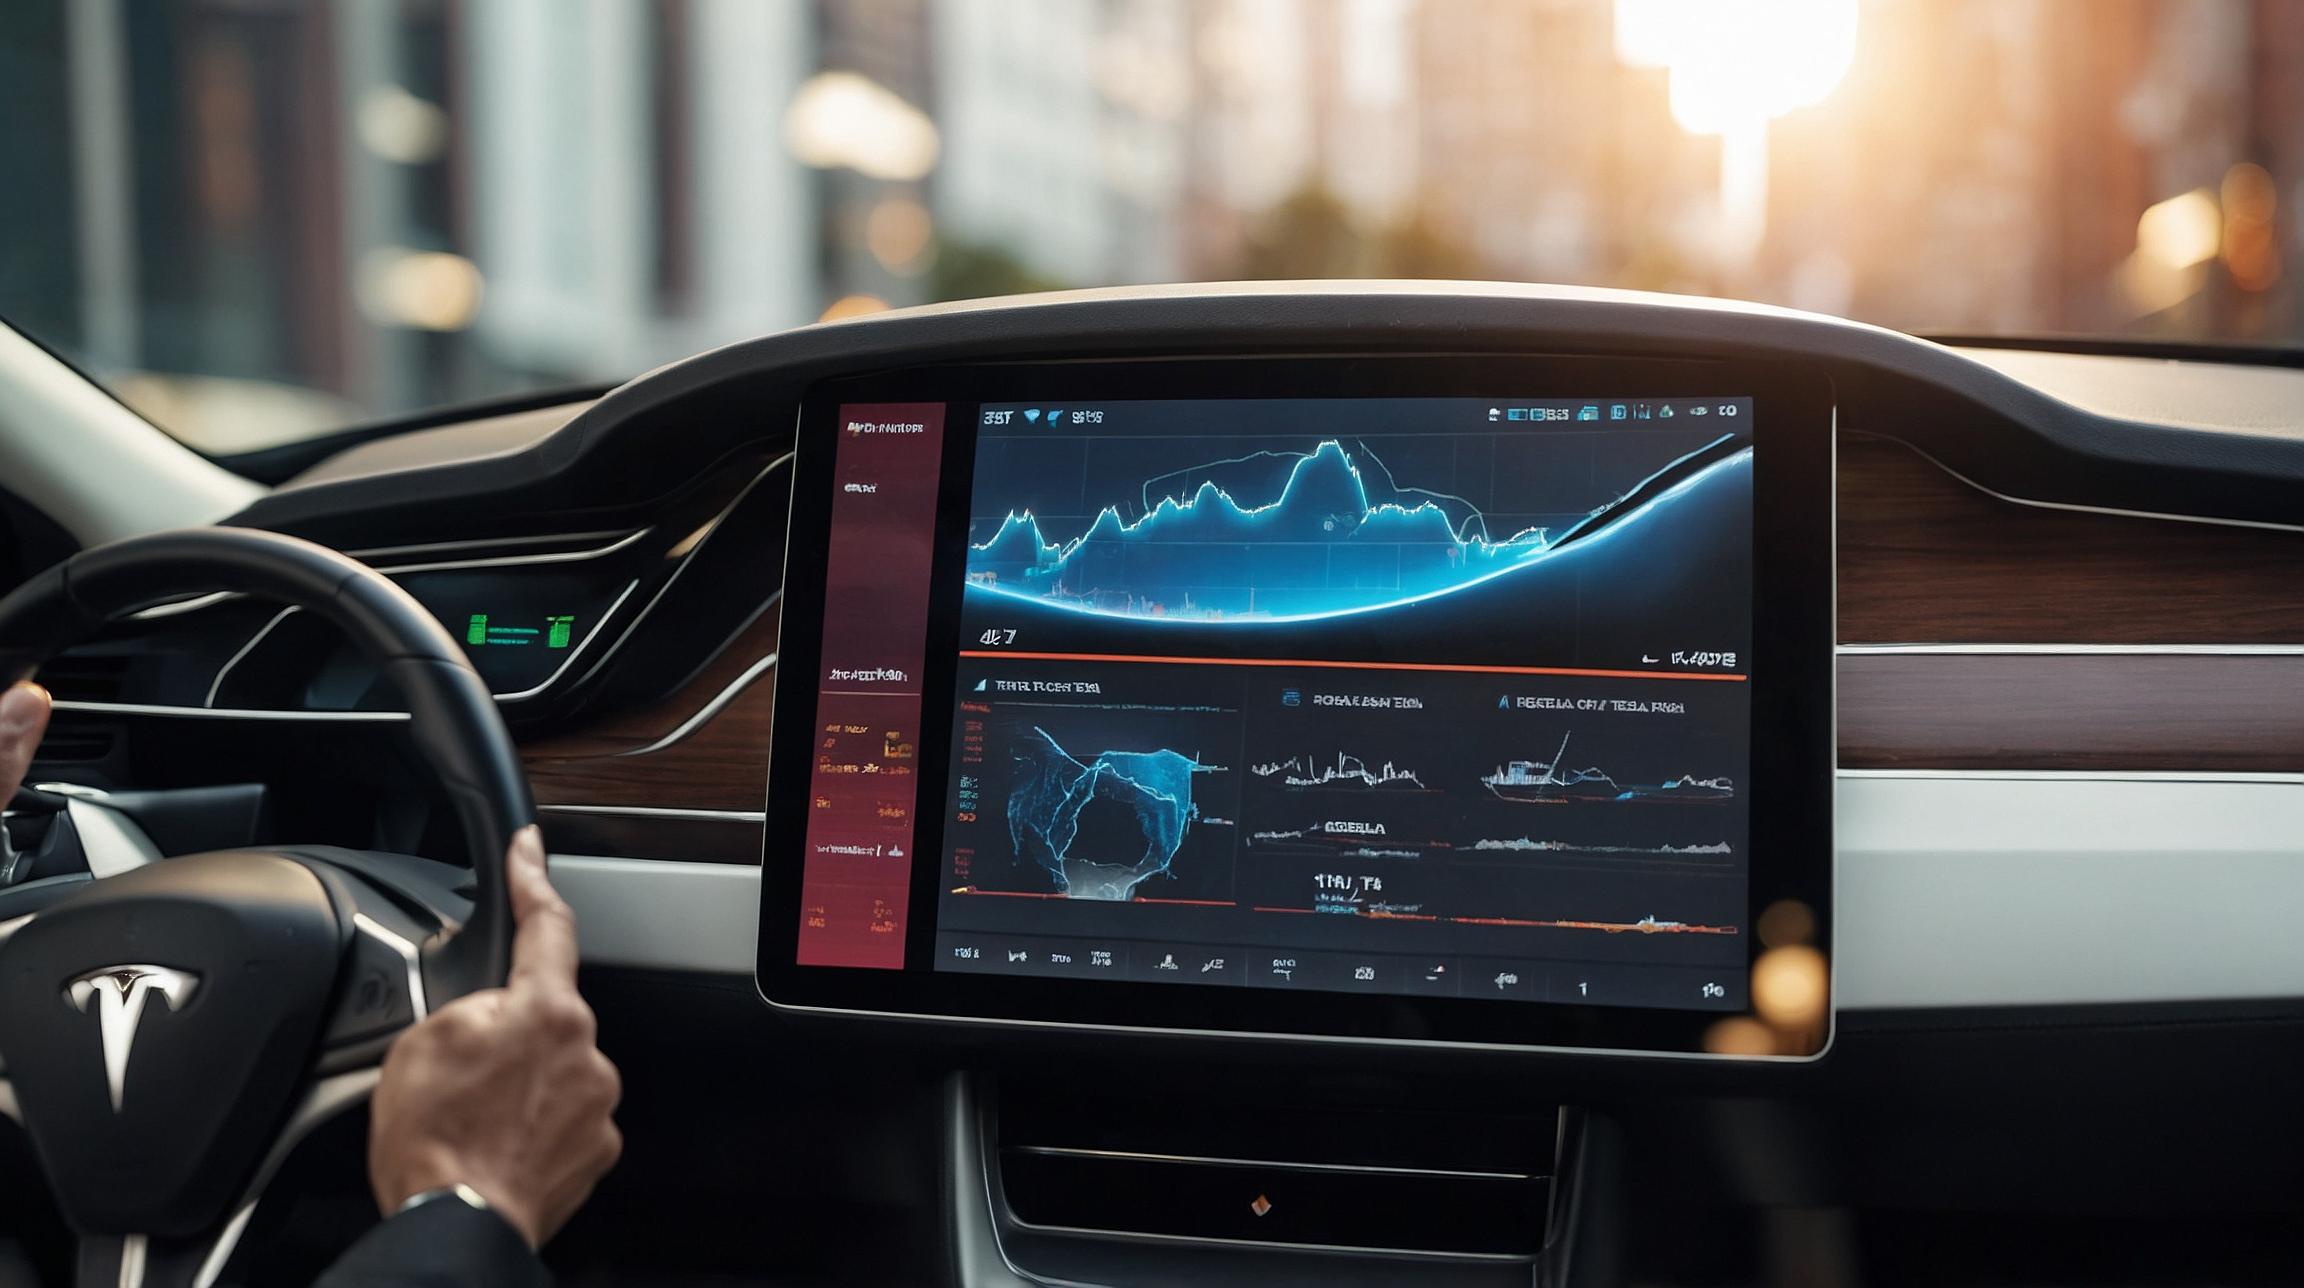 Tesla Inc Financial Report: Key Stock Updates and Analysis | FinOracle